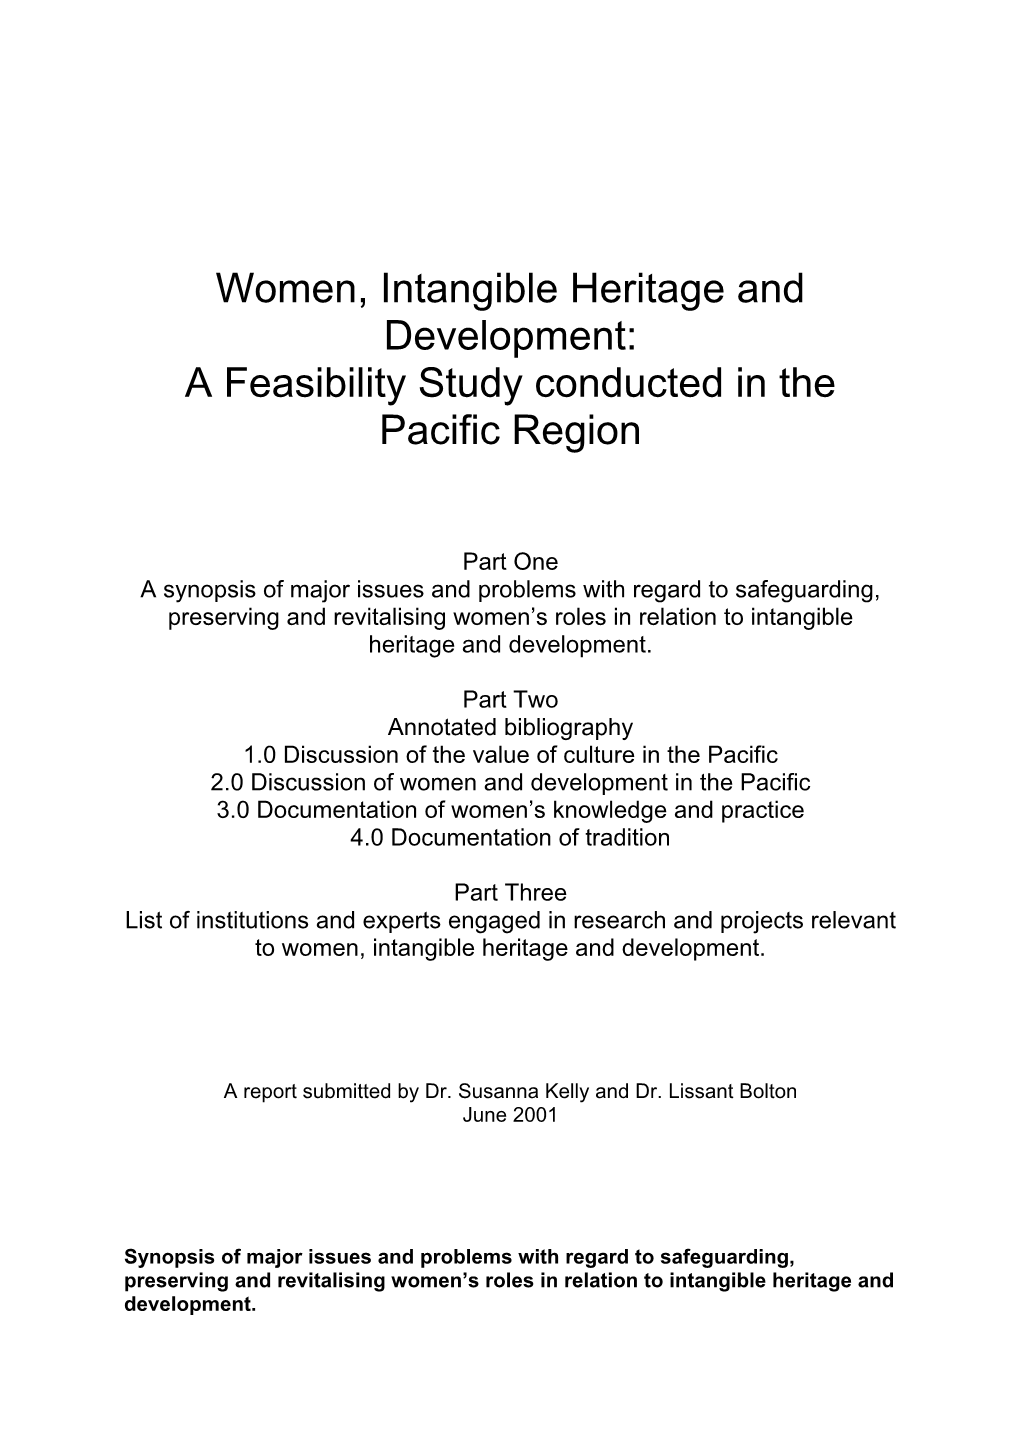 Women, Intangible Heritage and Development: a Feasibility Study Conducted in the Pacific Region